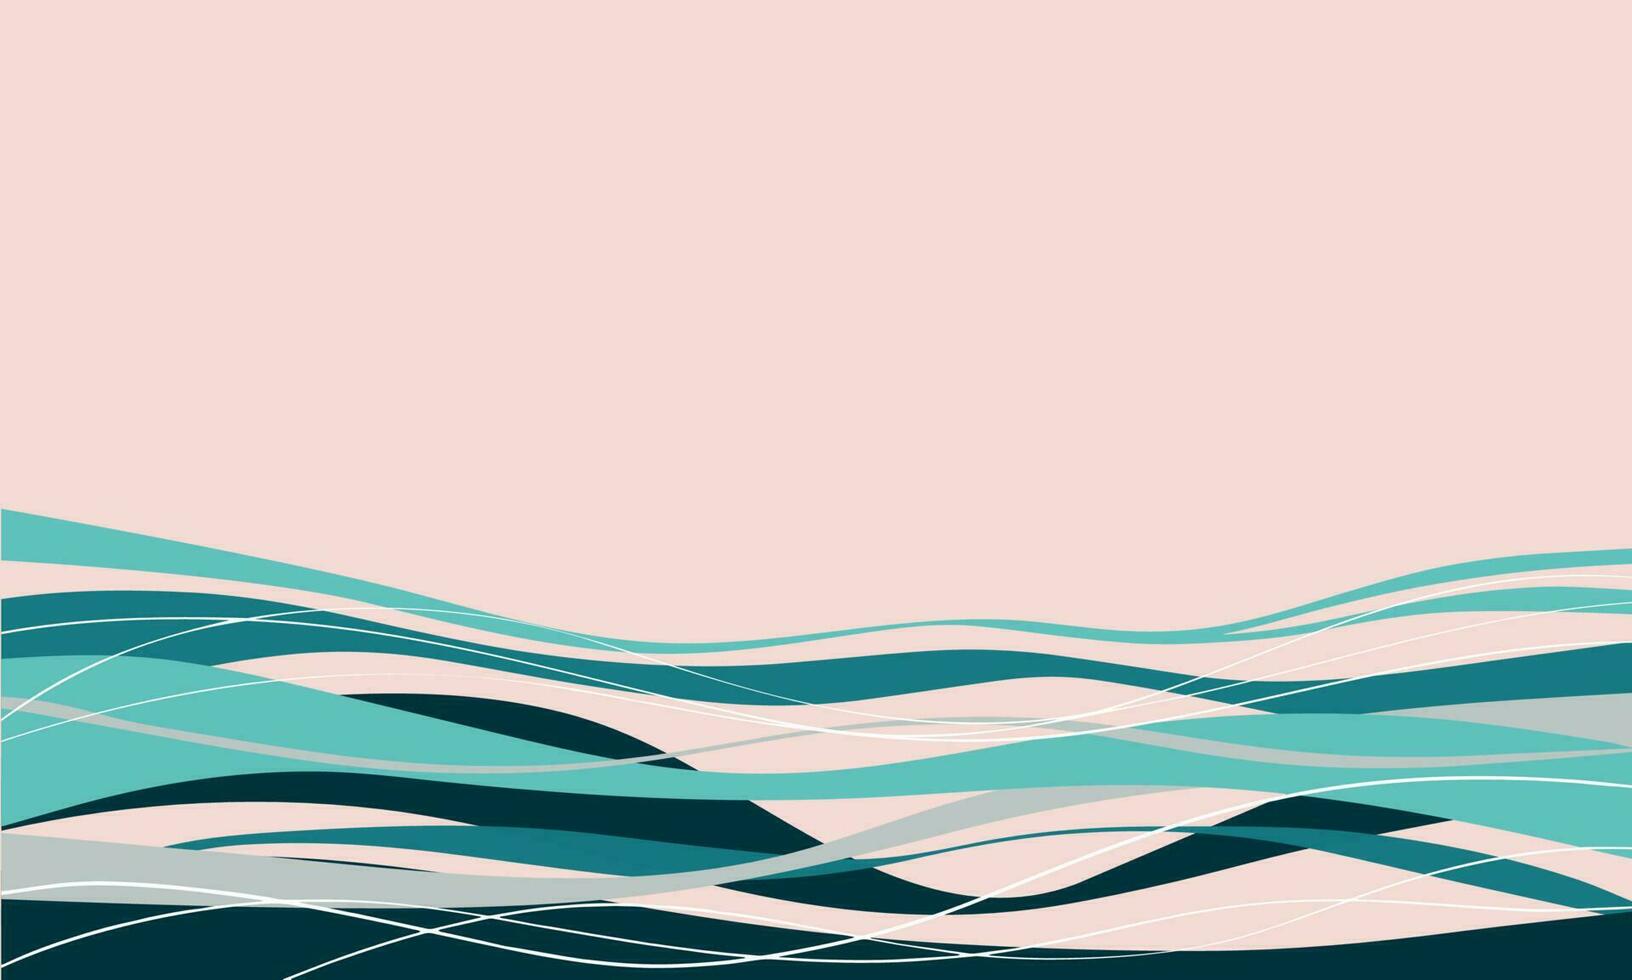 Abstract waves in teal, turquoise, blue and sand, grey waves on rose colored background, Vector illustration